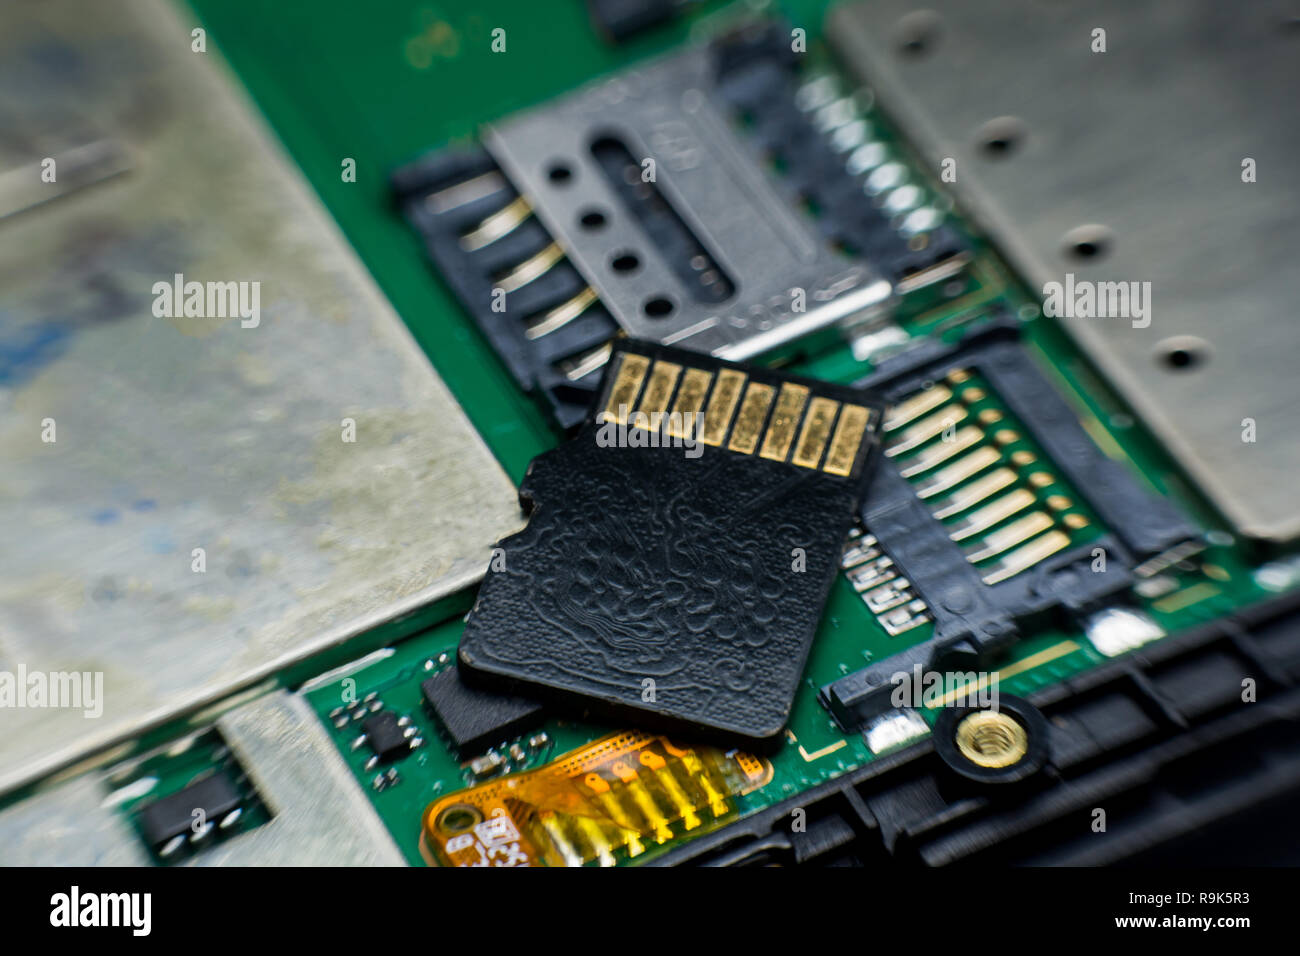 Micro sd card slot inside electronic circuit board smart phone. disassembled cell phone parts. Stock Photo